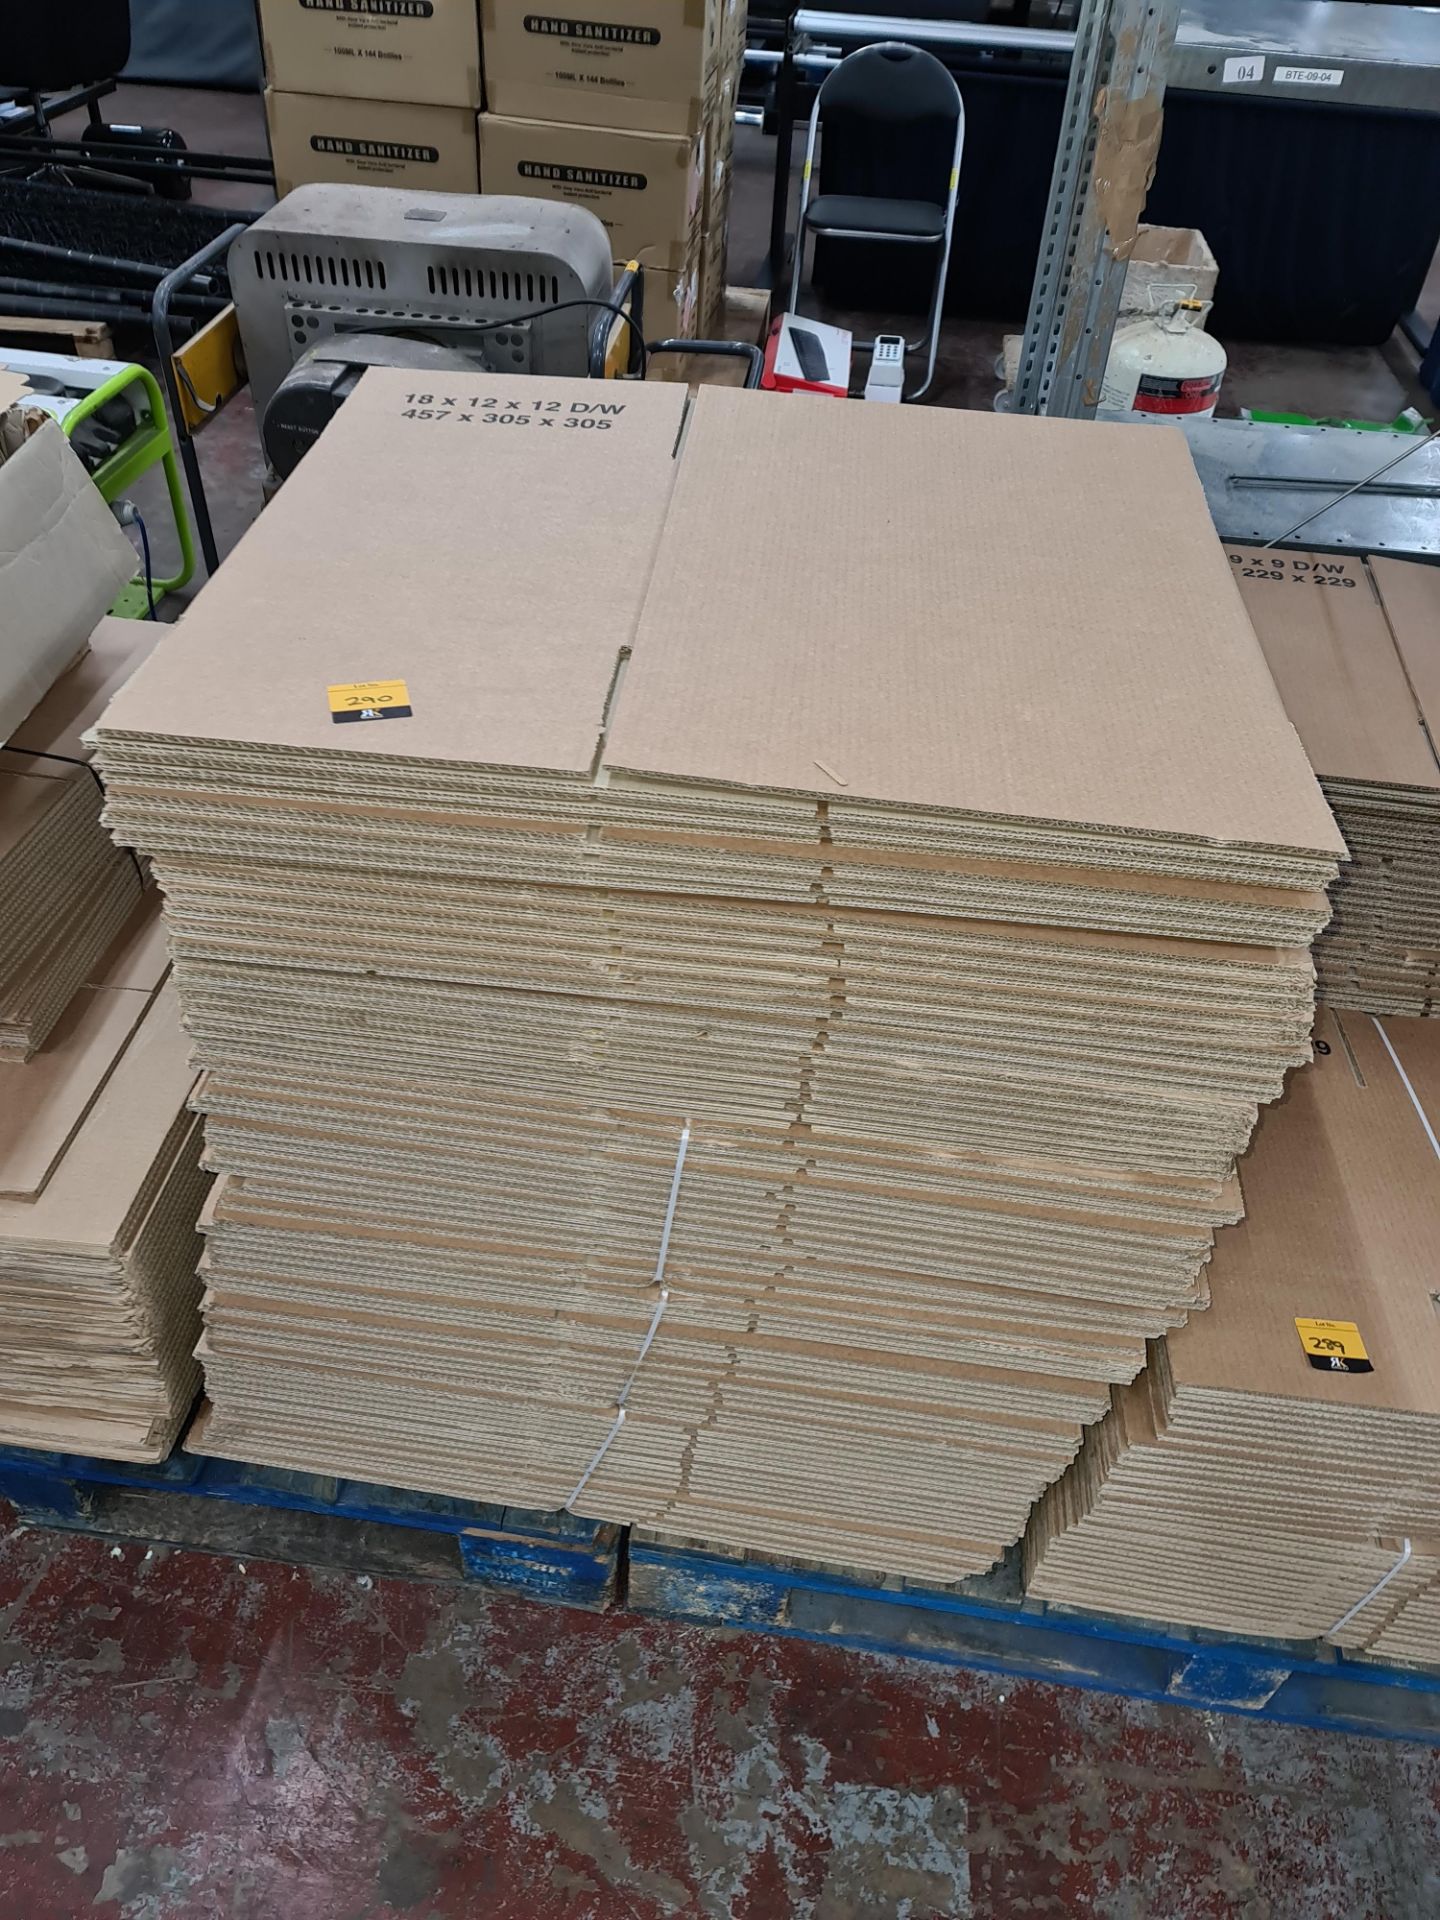 3 bundles of flatpack cardboard boxes each measuring 457 x 305 x 305. NB this lot also includes a